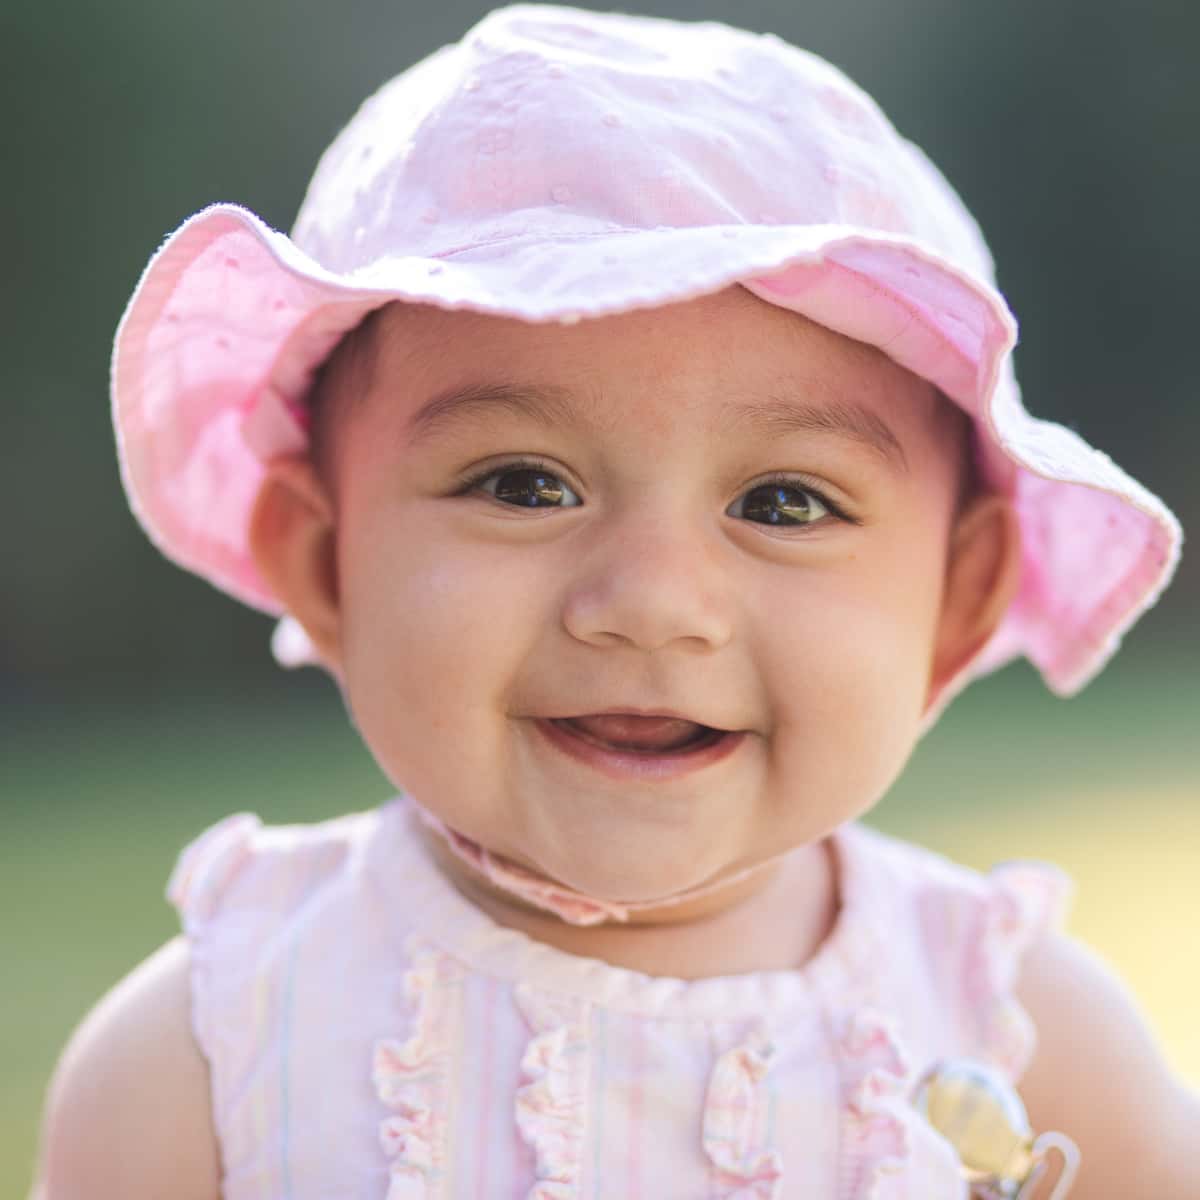 Close-up of baby girl wearing hat.